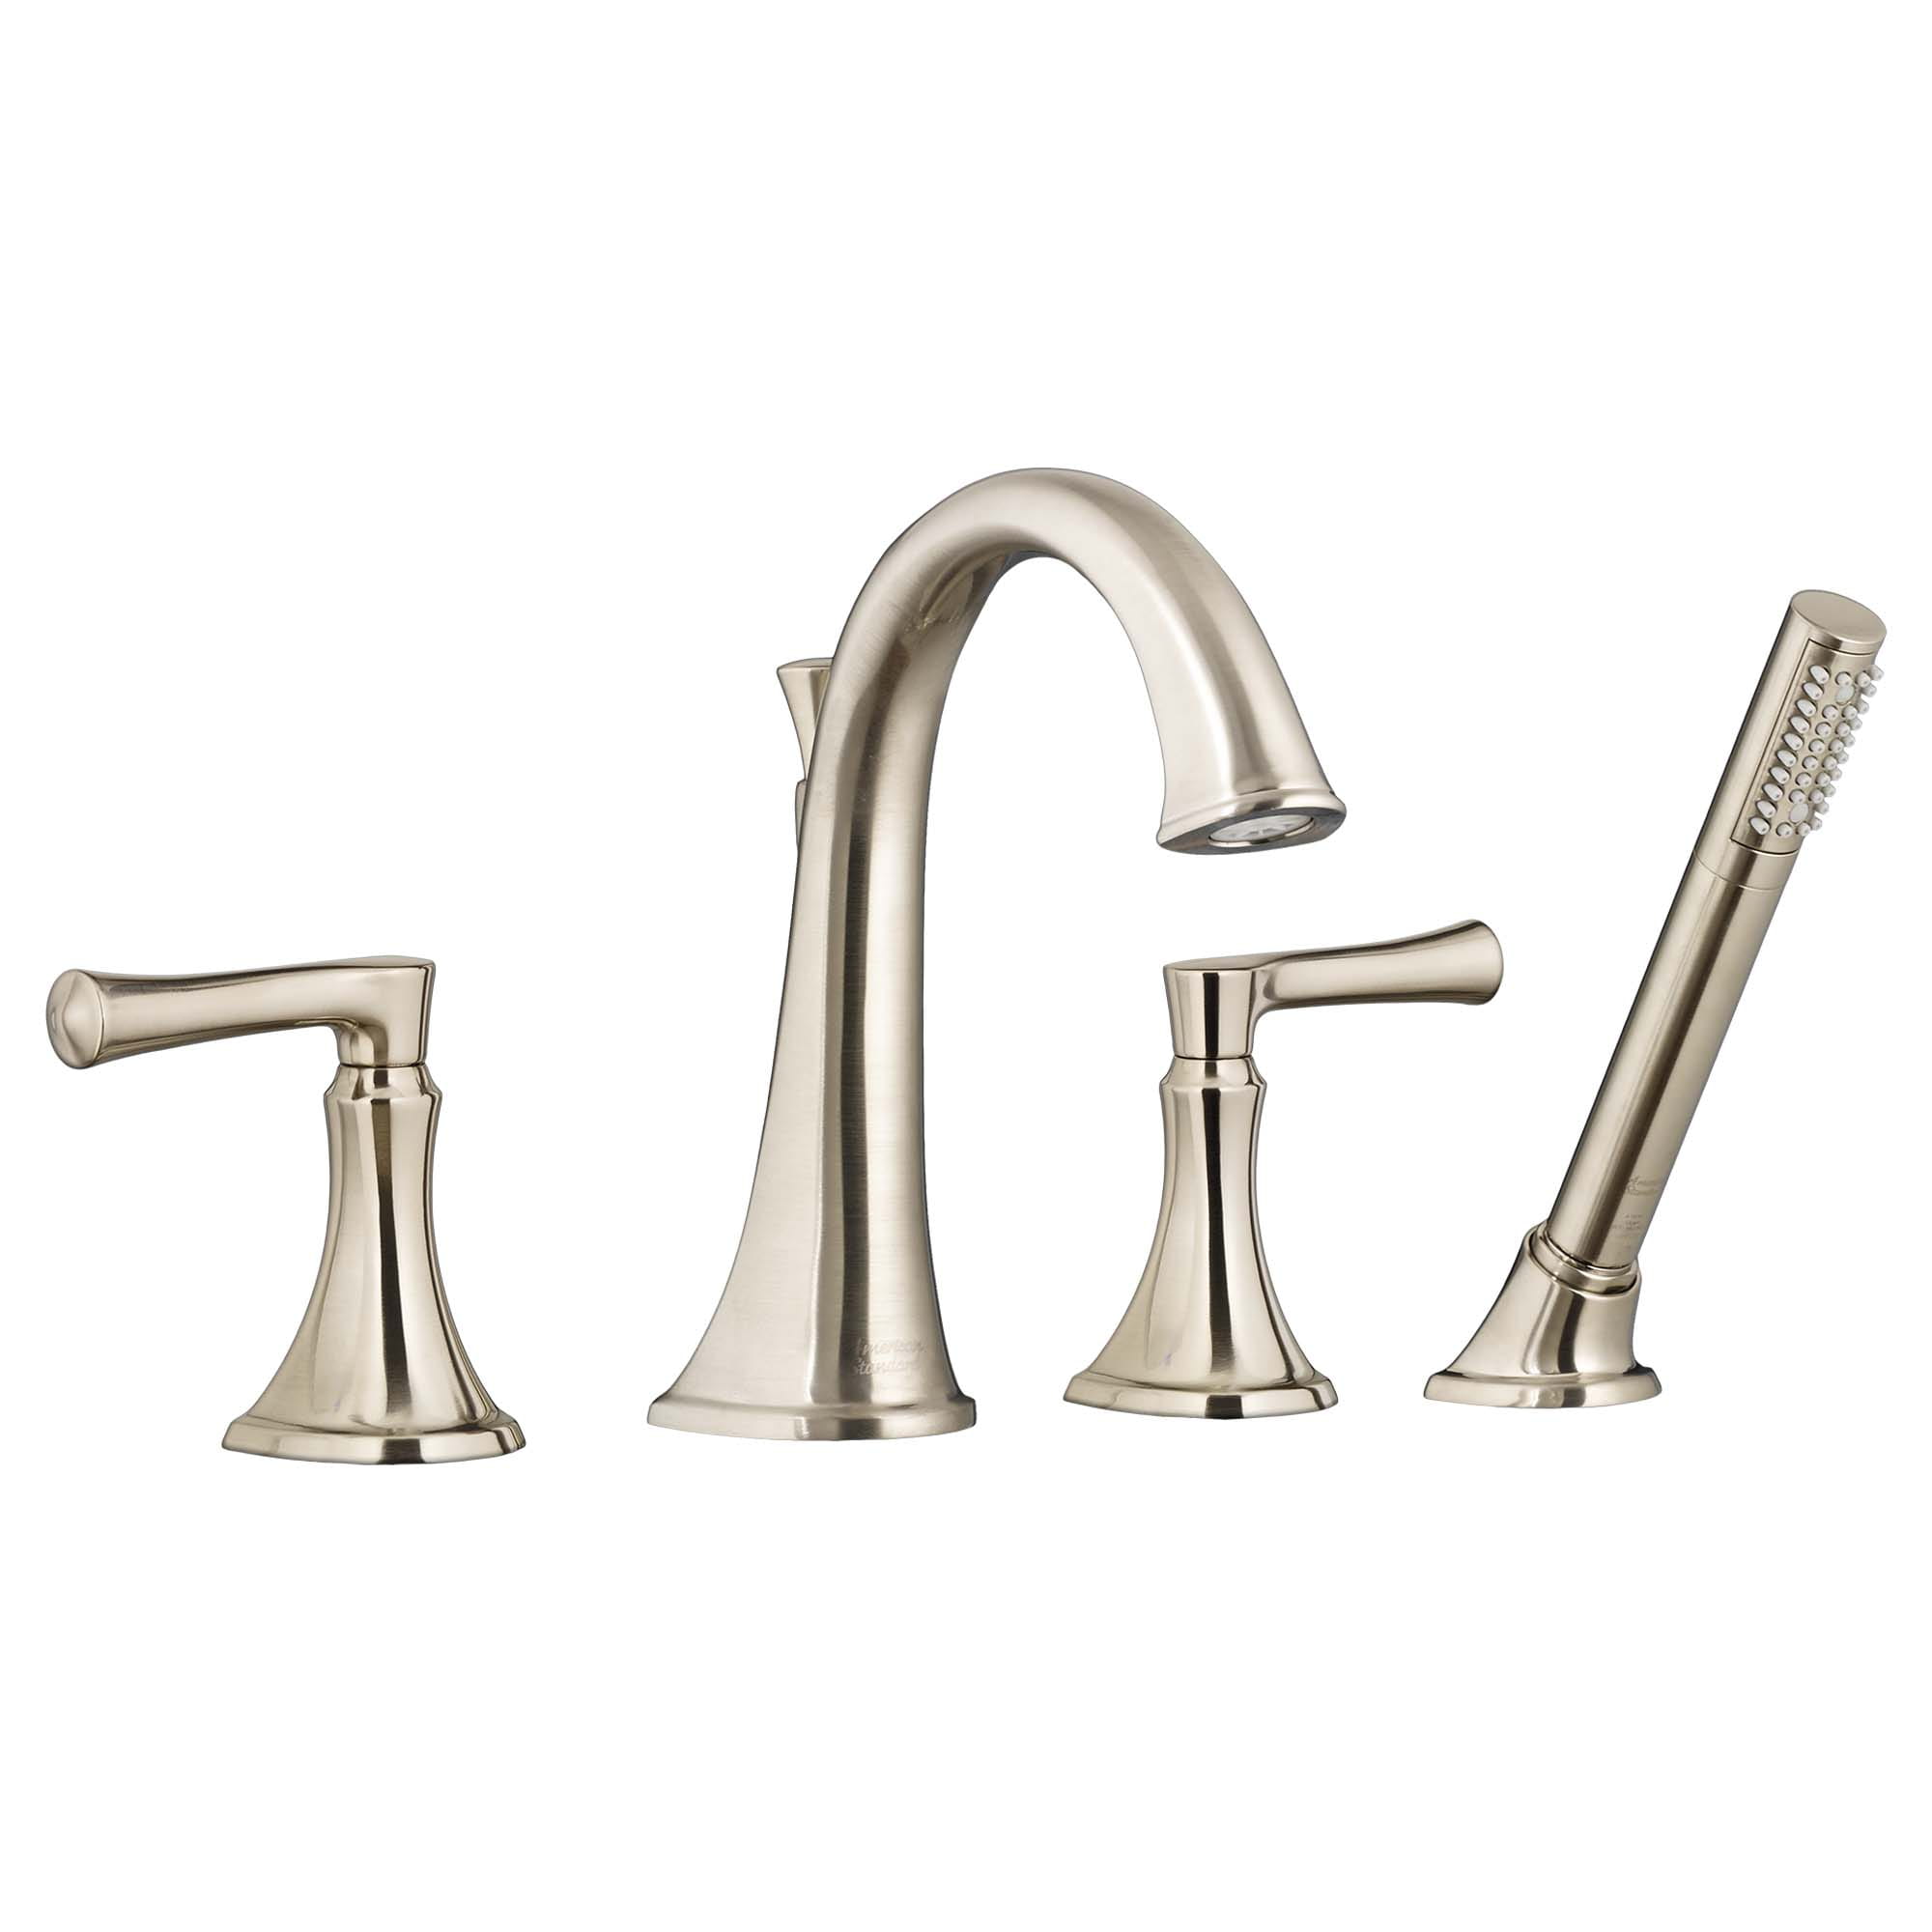 Estate Deck-Mount Bathtub Faucet with Personal Shower for Flash Rough-in Valve with Lever Handle